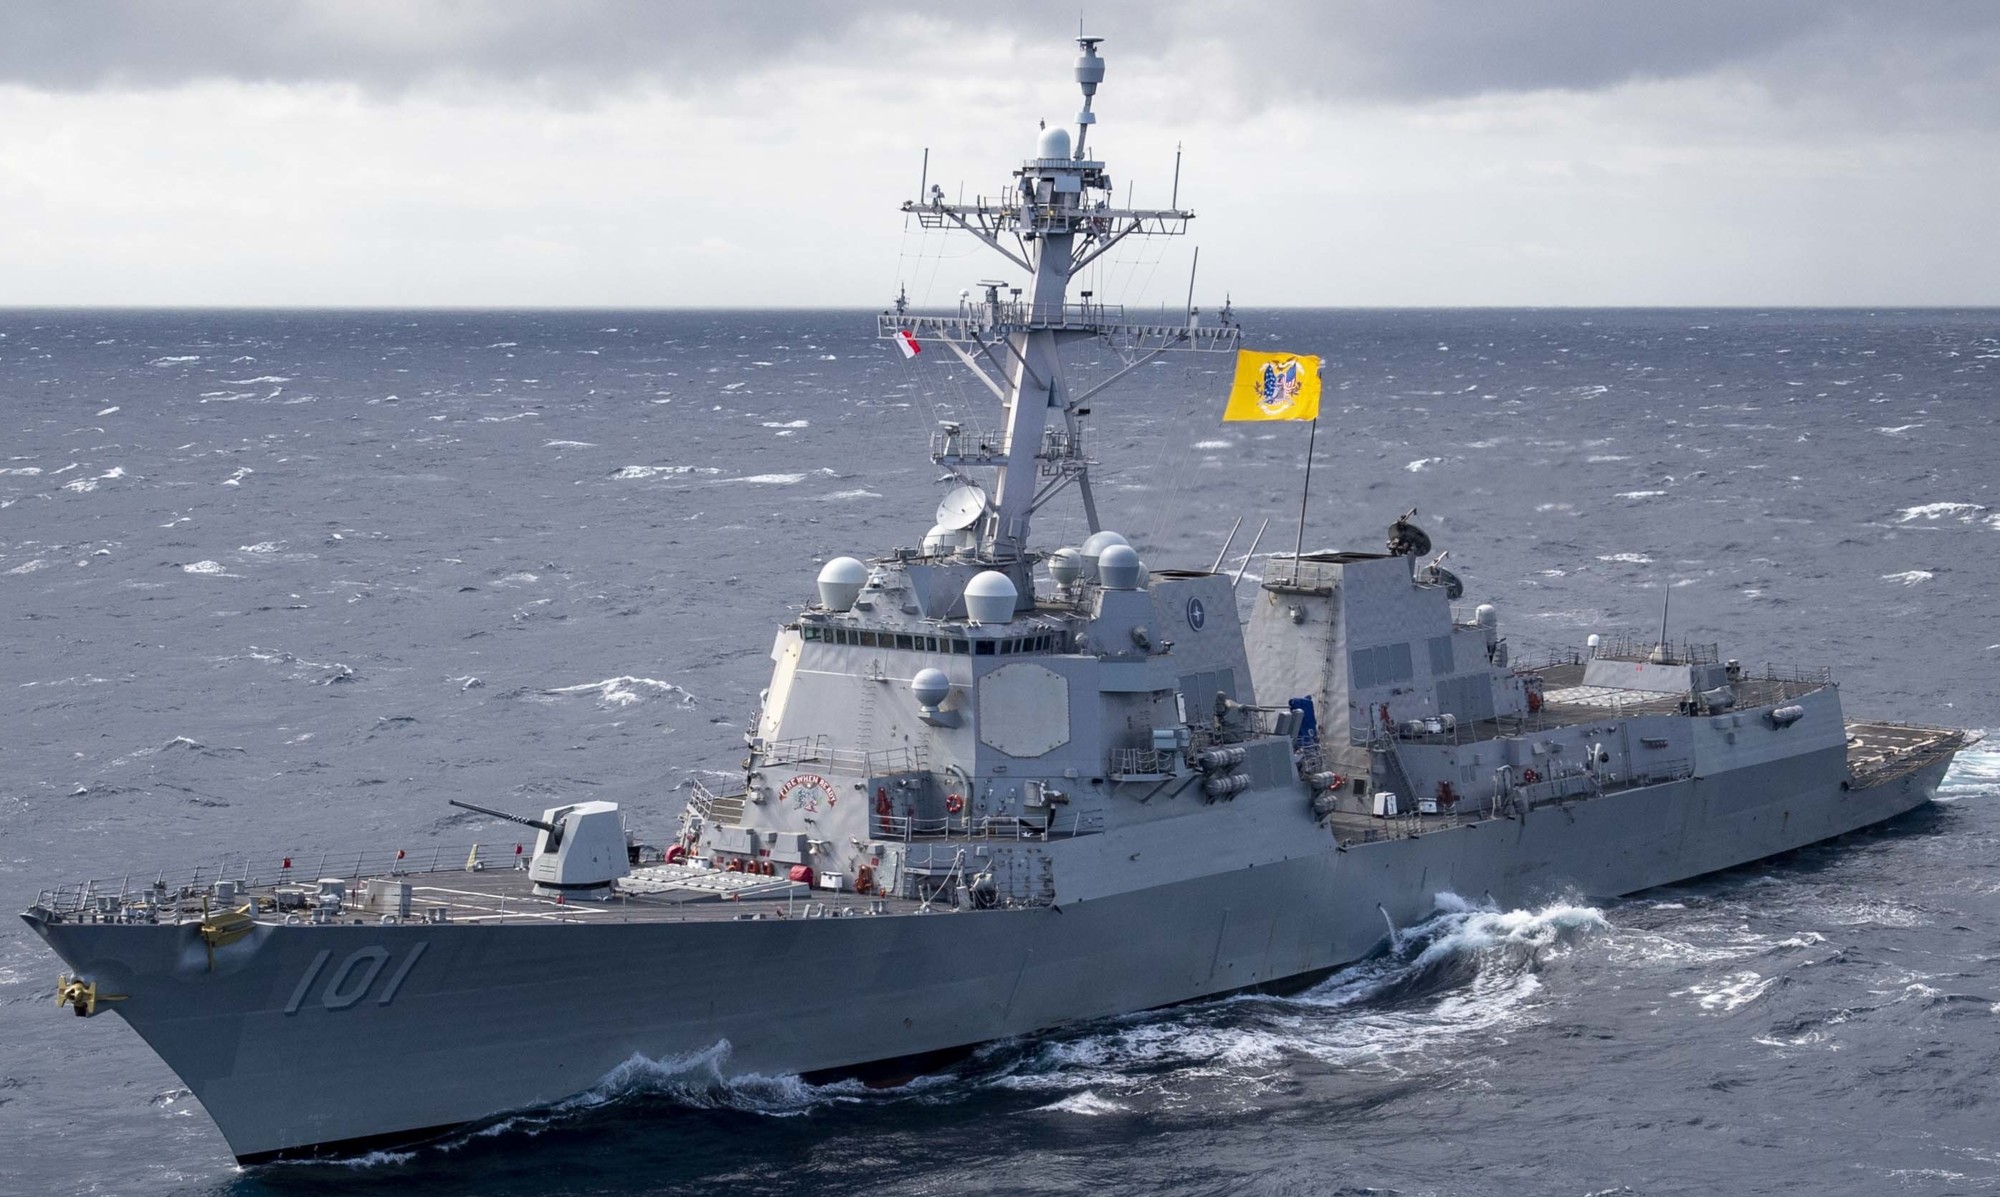 ddg-101 uss gridley arleigh burke class guided missile destroyer aegis us navy 62